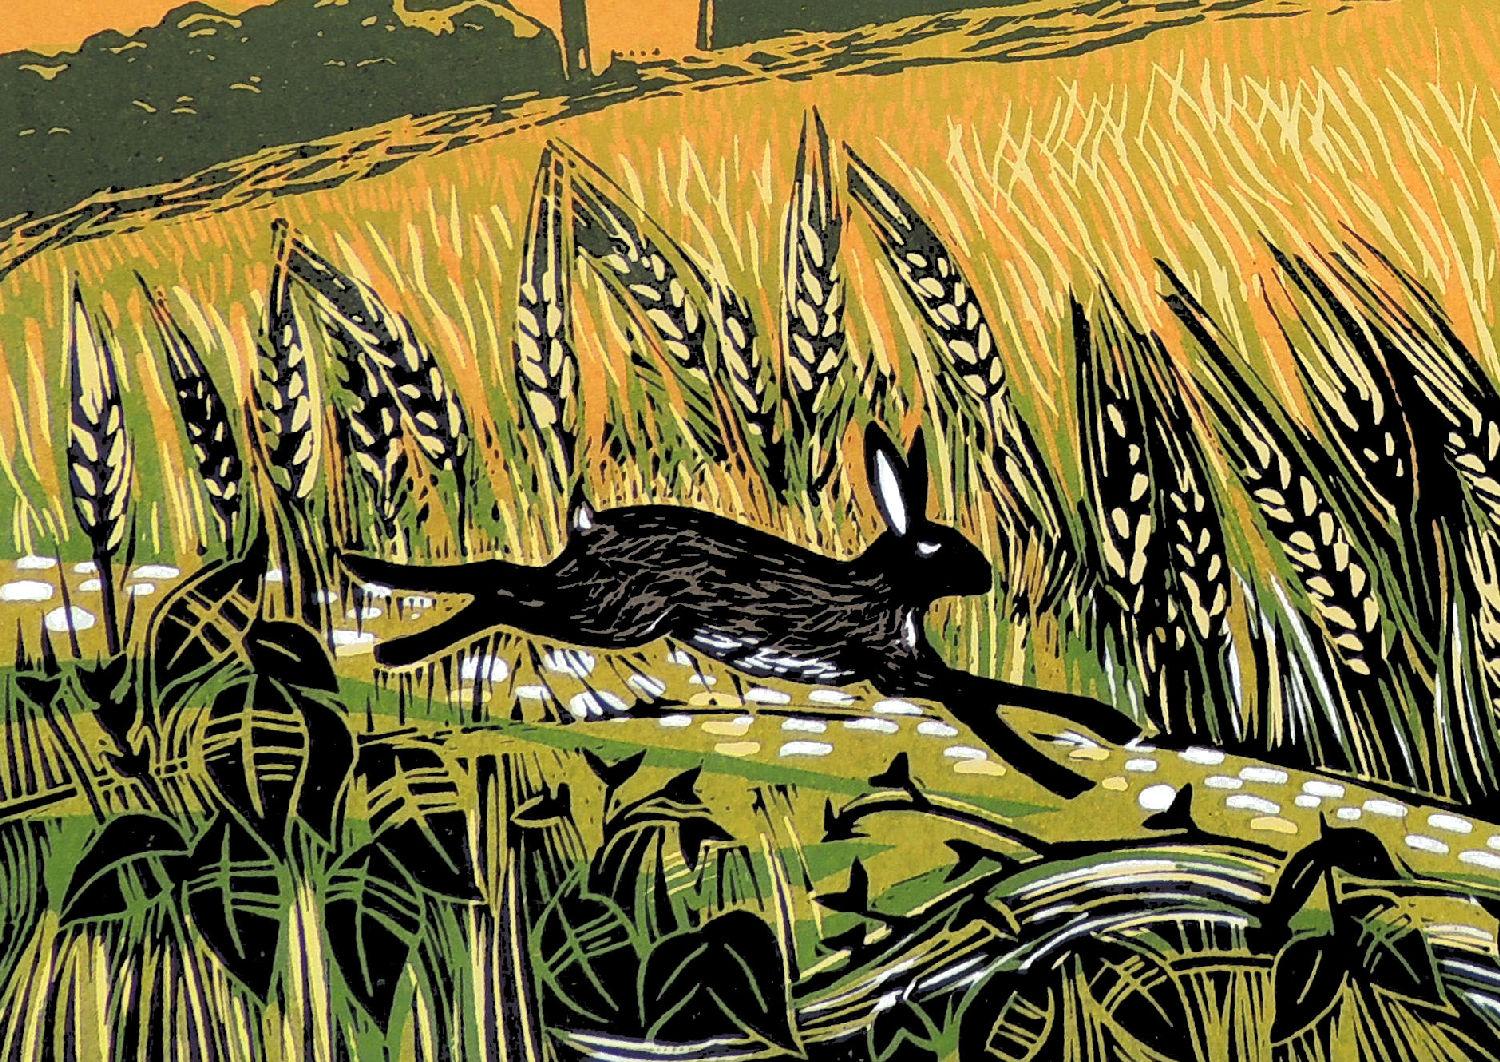 Running Through The Barley, Limited edition art print, Landscape, Nature, Fields - Contemporary Print by Rob Barnes